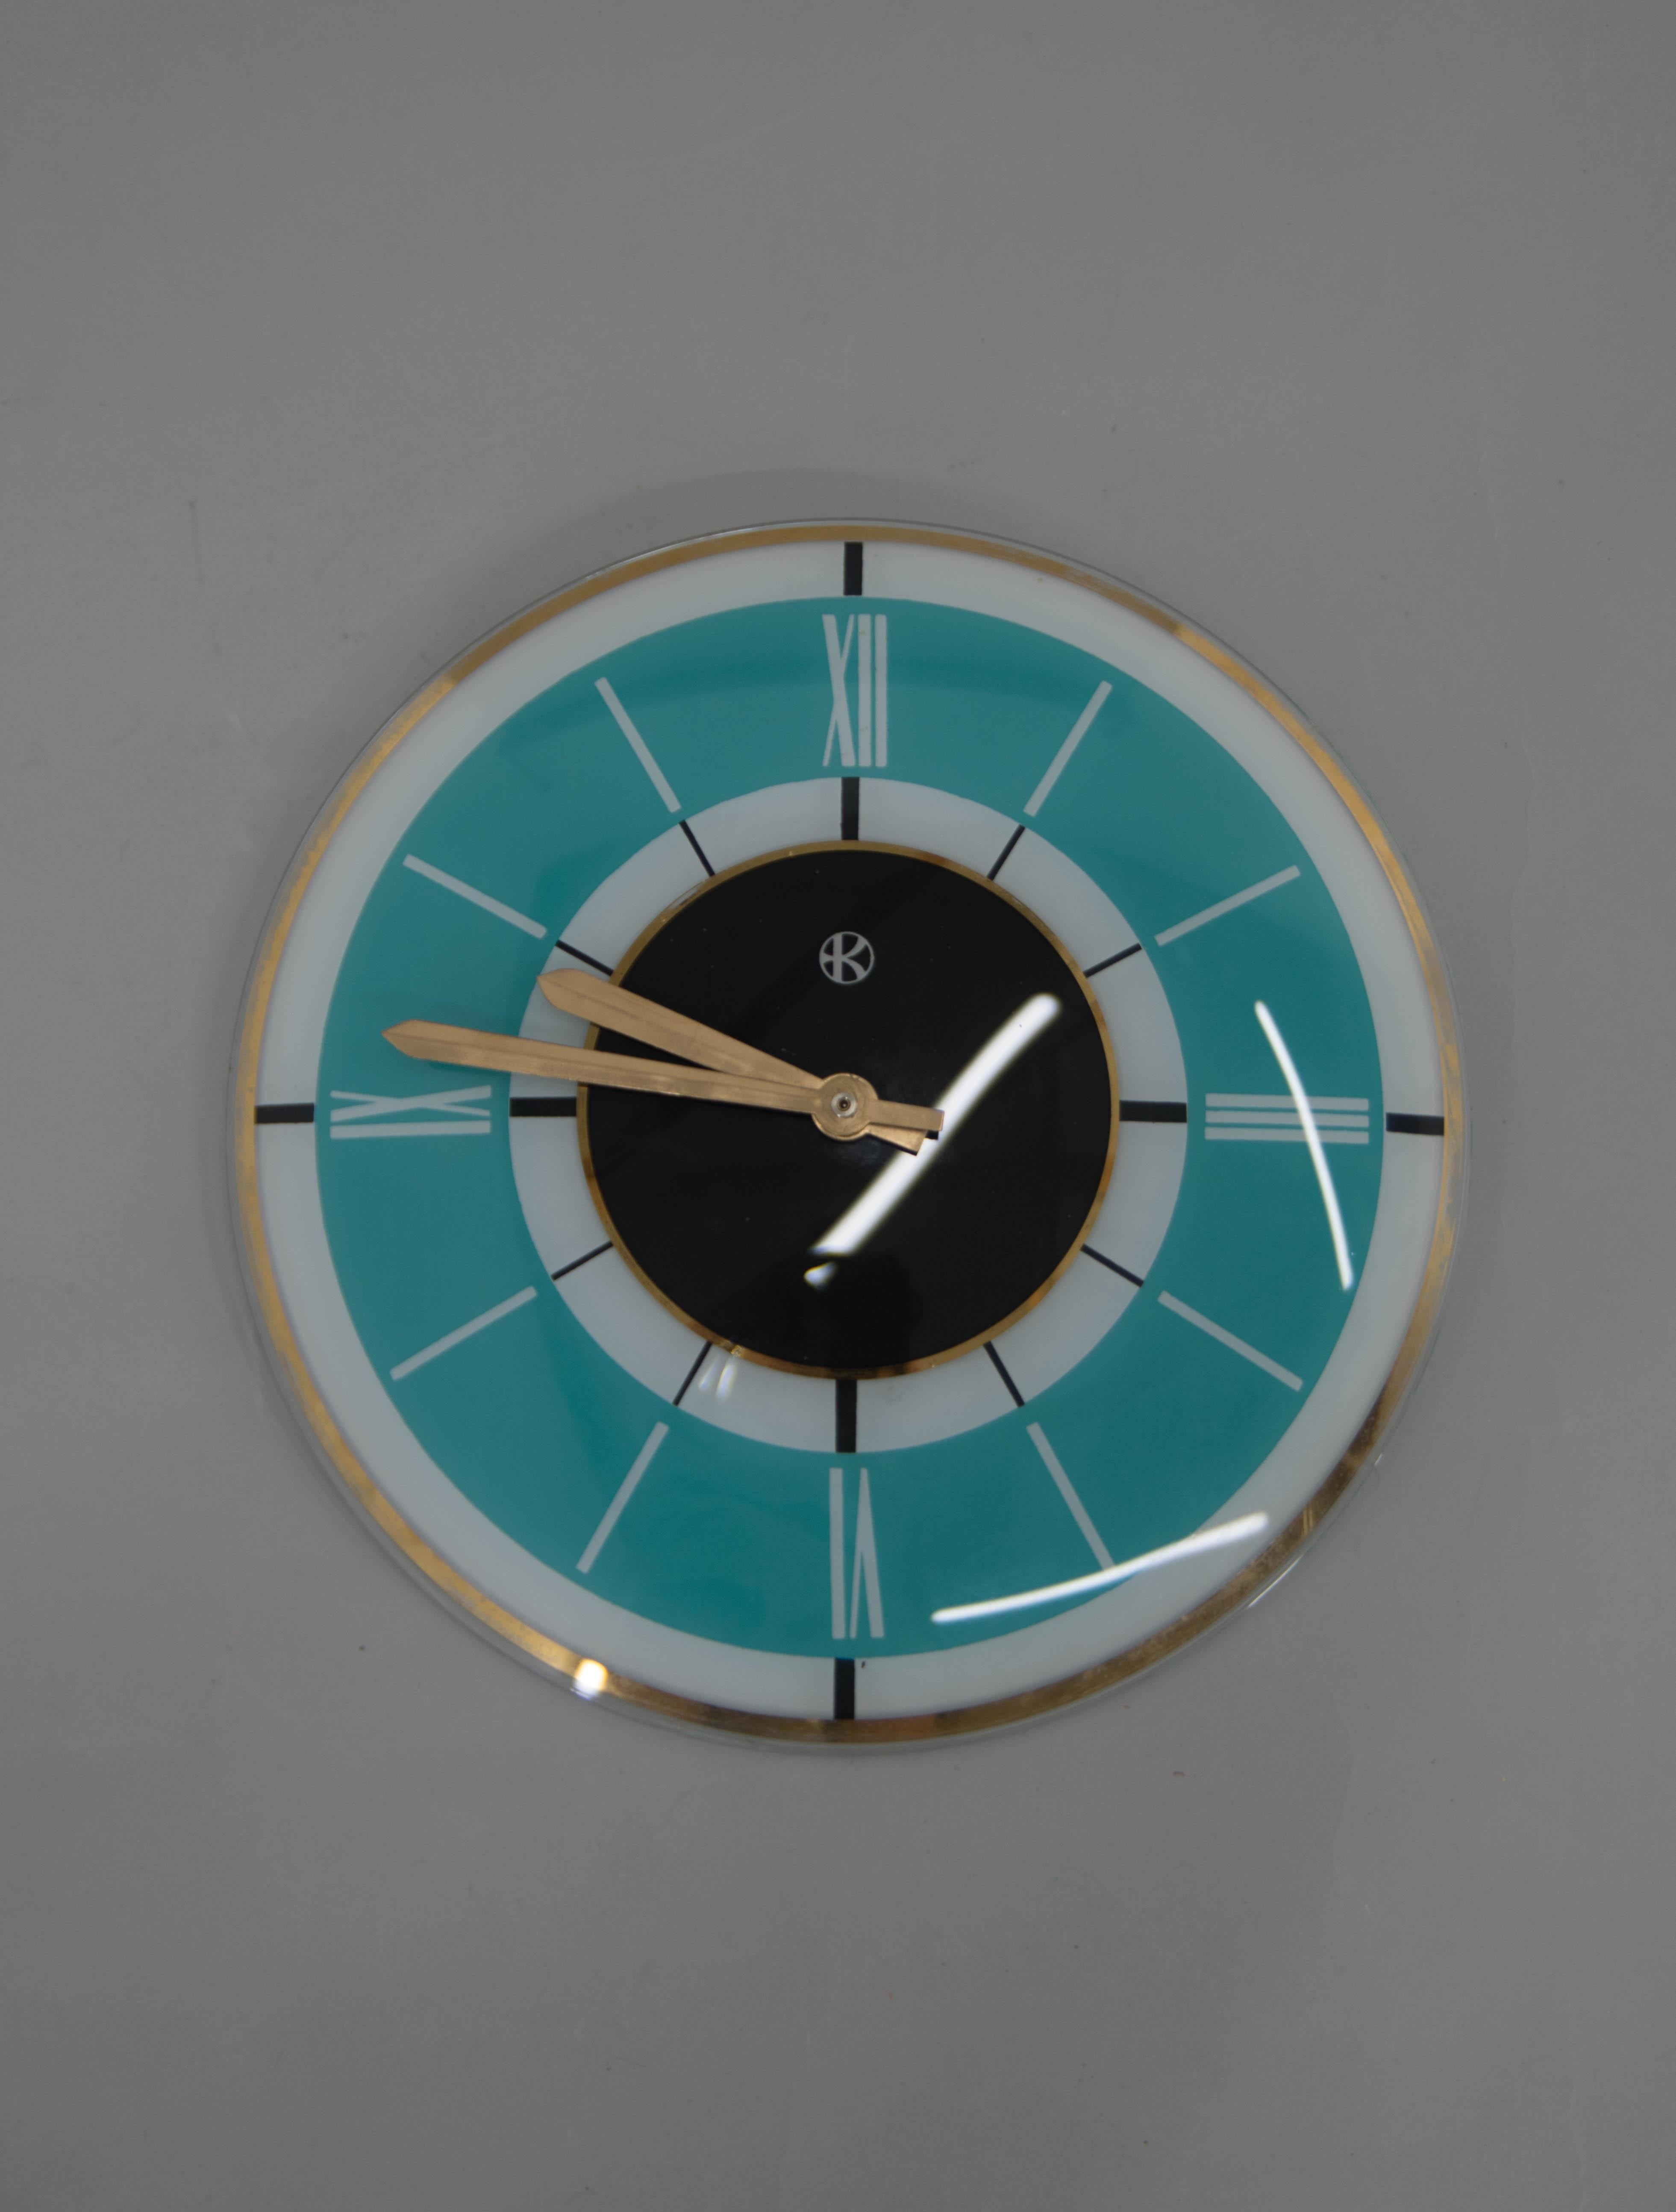 Wall clock made by Klenoty in Czechoslovakia in 1960s.
Made of glass and brass.
Fully functional.